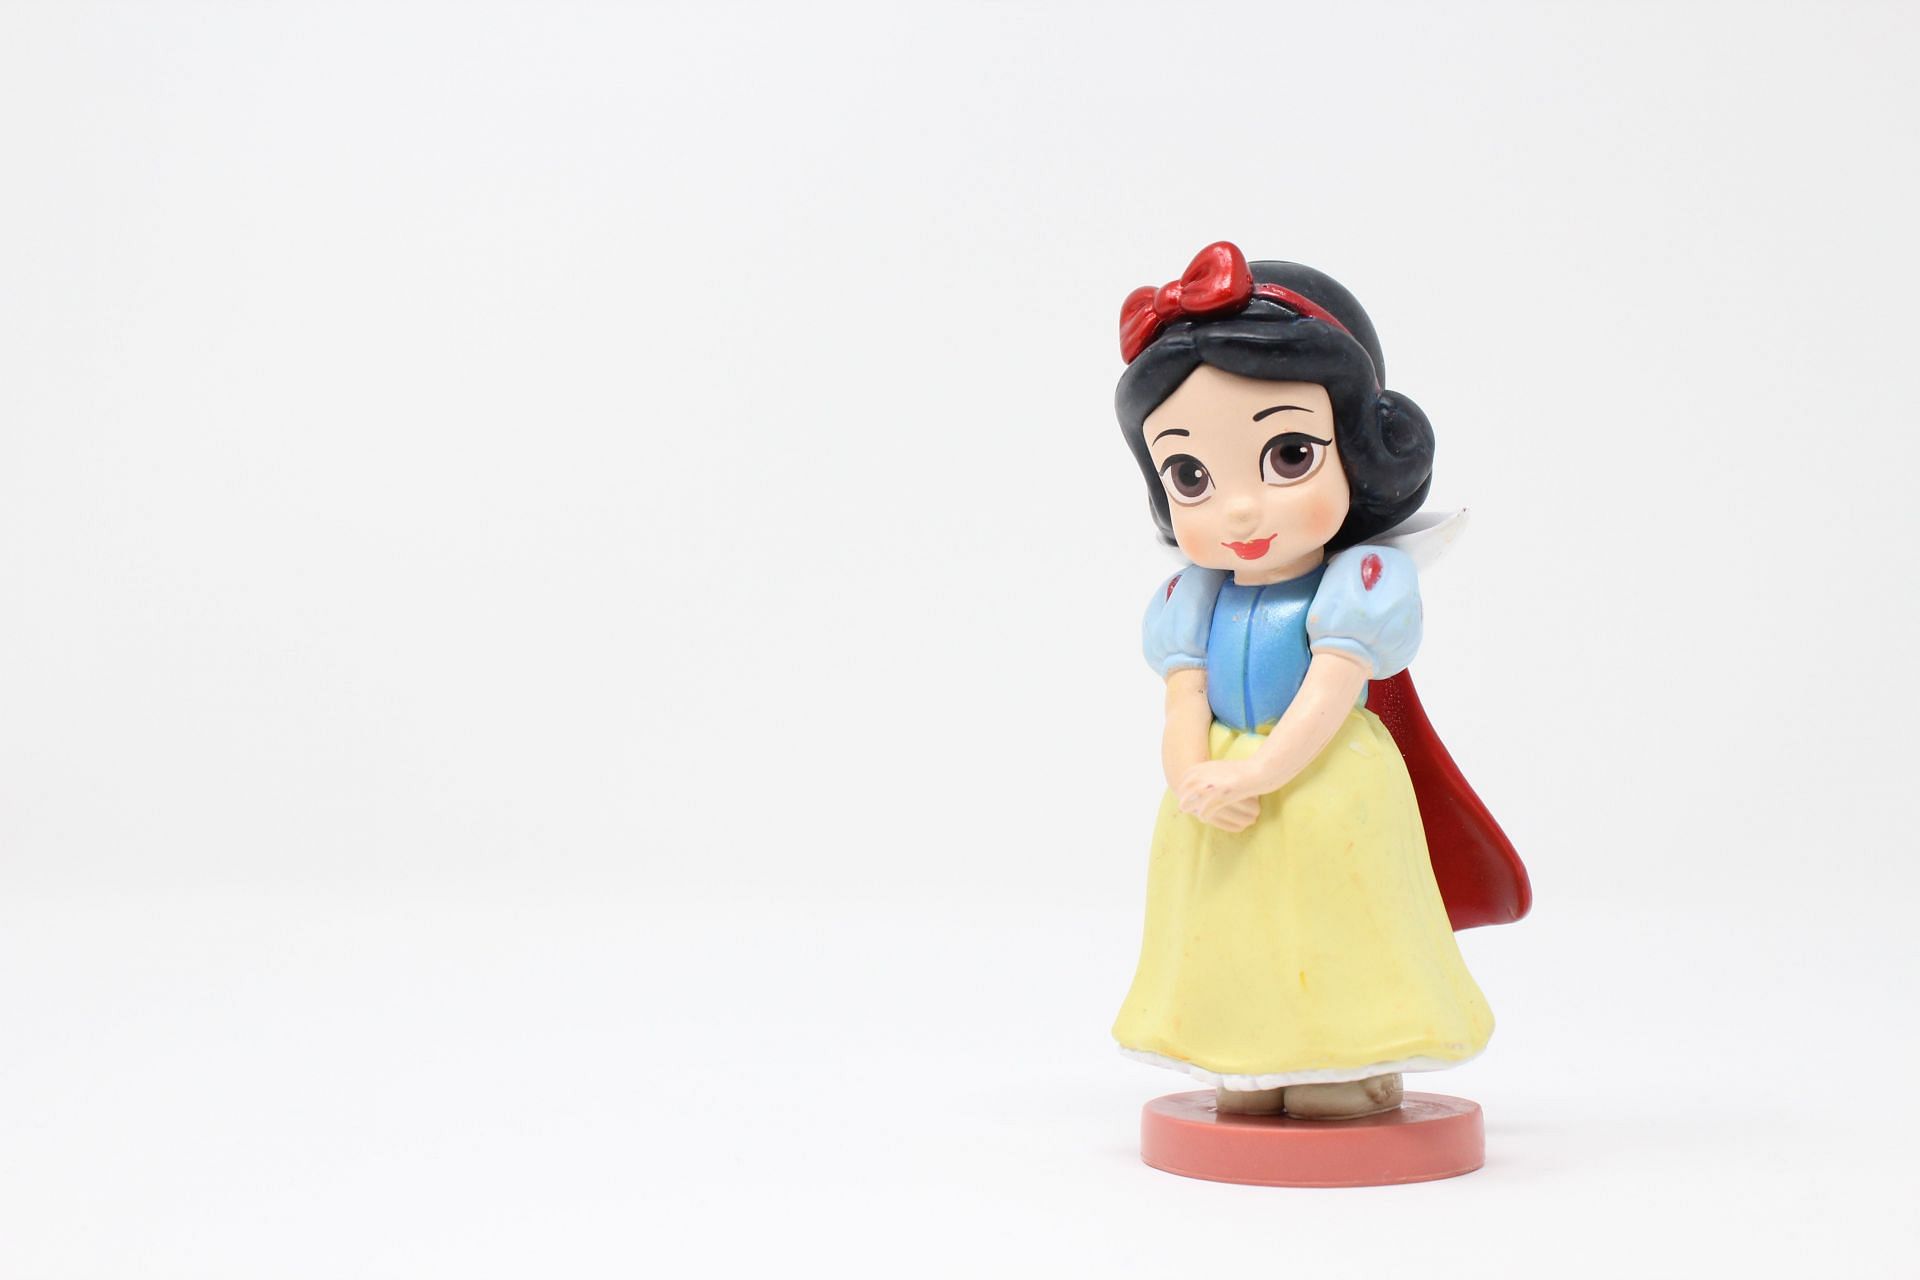 Disney princess mental disorders are representations that need to be talked about. (Image via Unsplash/ King Lip)